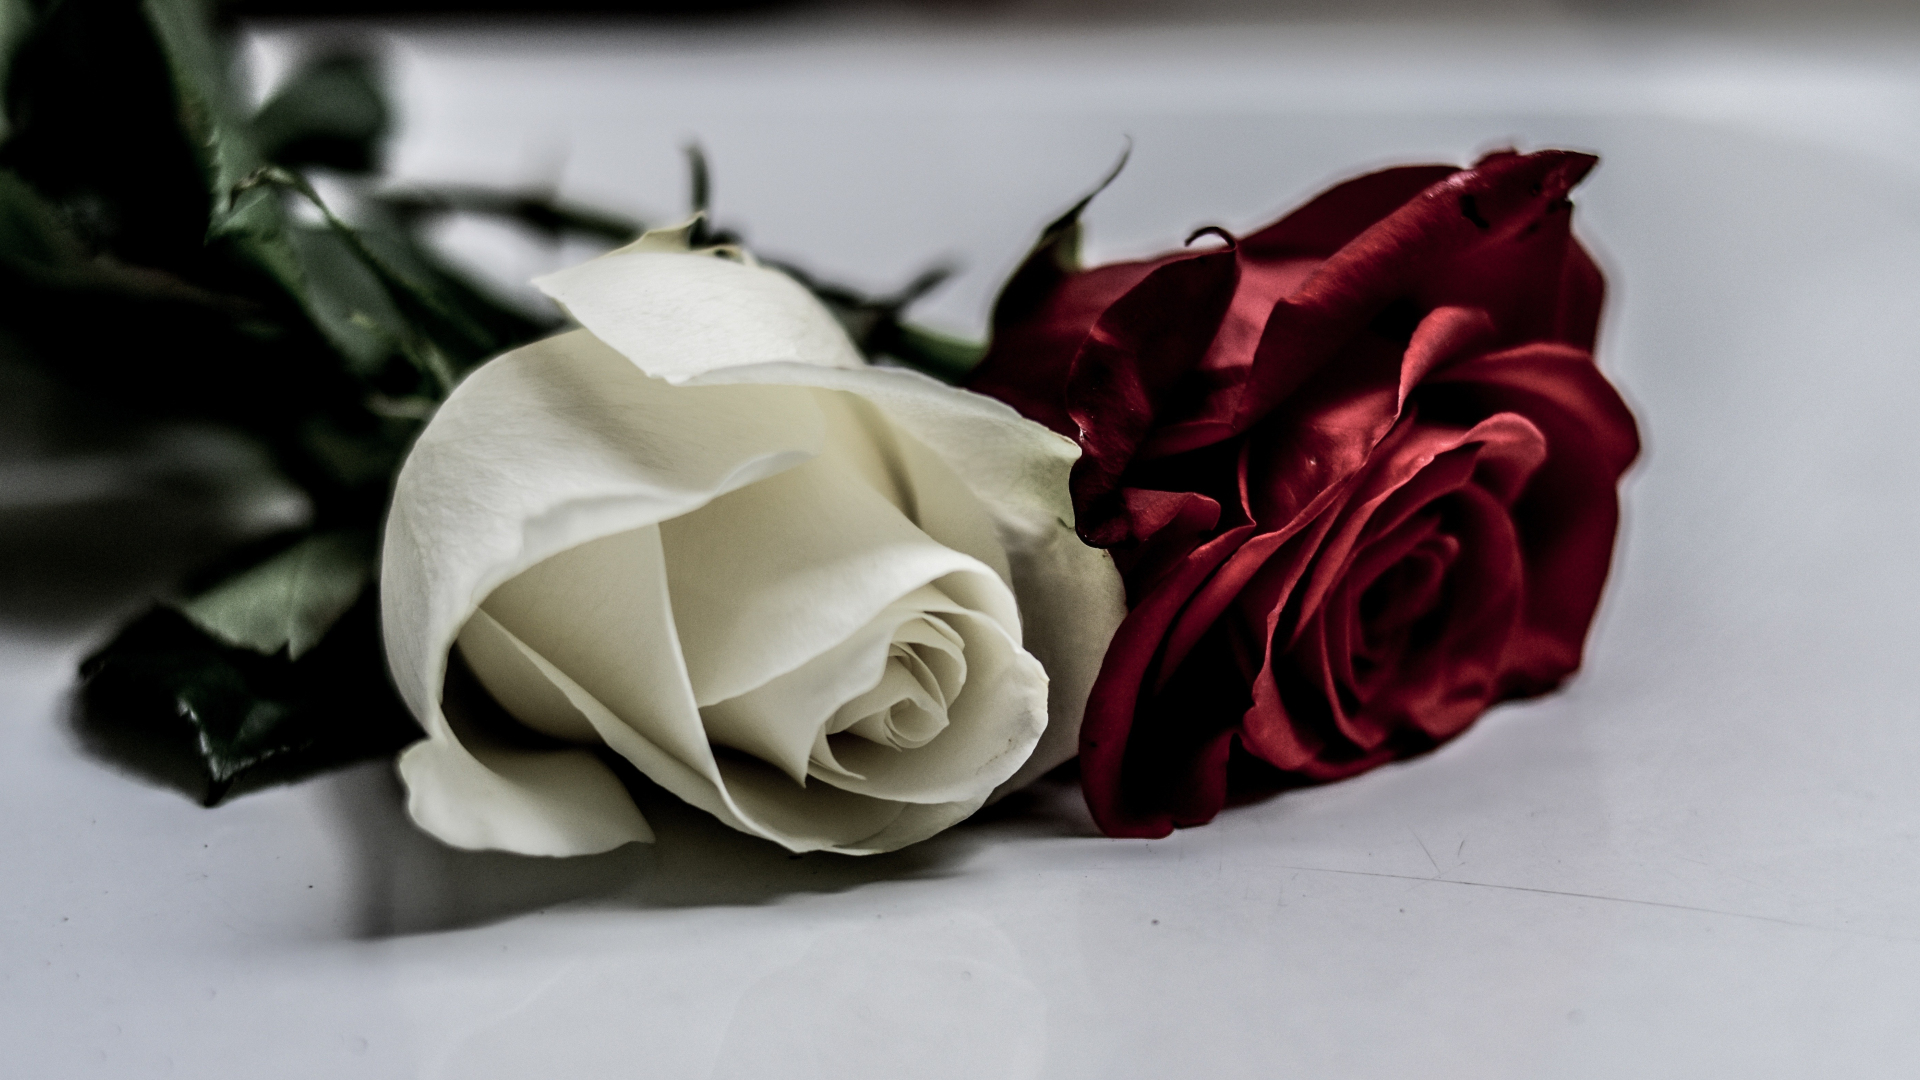 Download wallpaper 1920x1080 white & red roses, flowers, full hd, hdtv,  fhd, 1080p wallpaper, 1920x1080 hd background, 3998